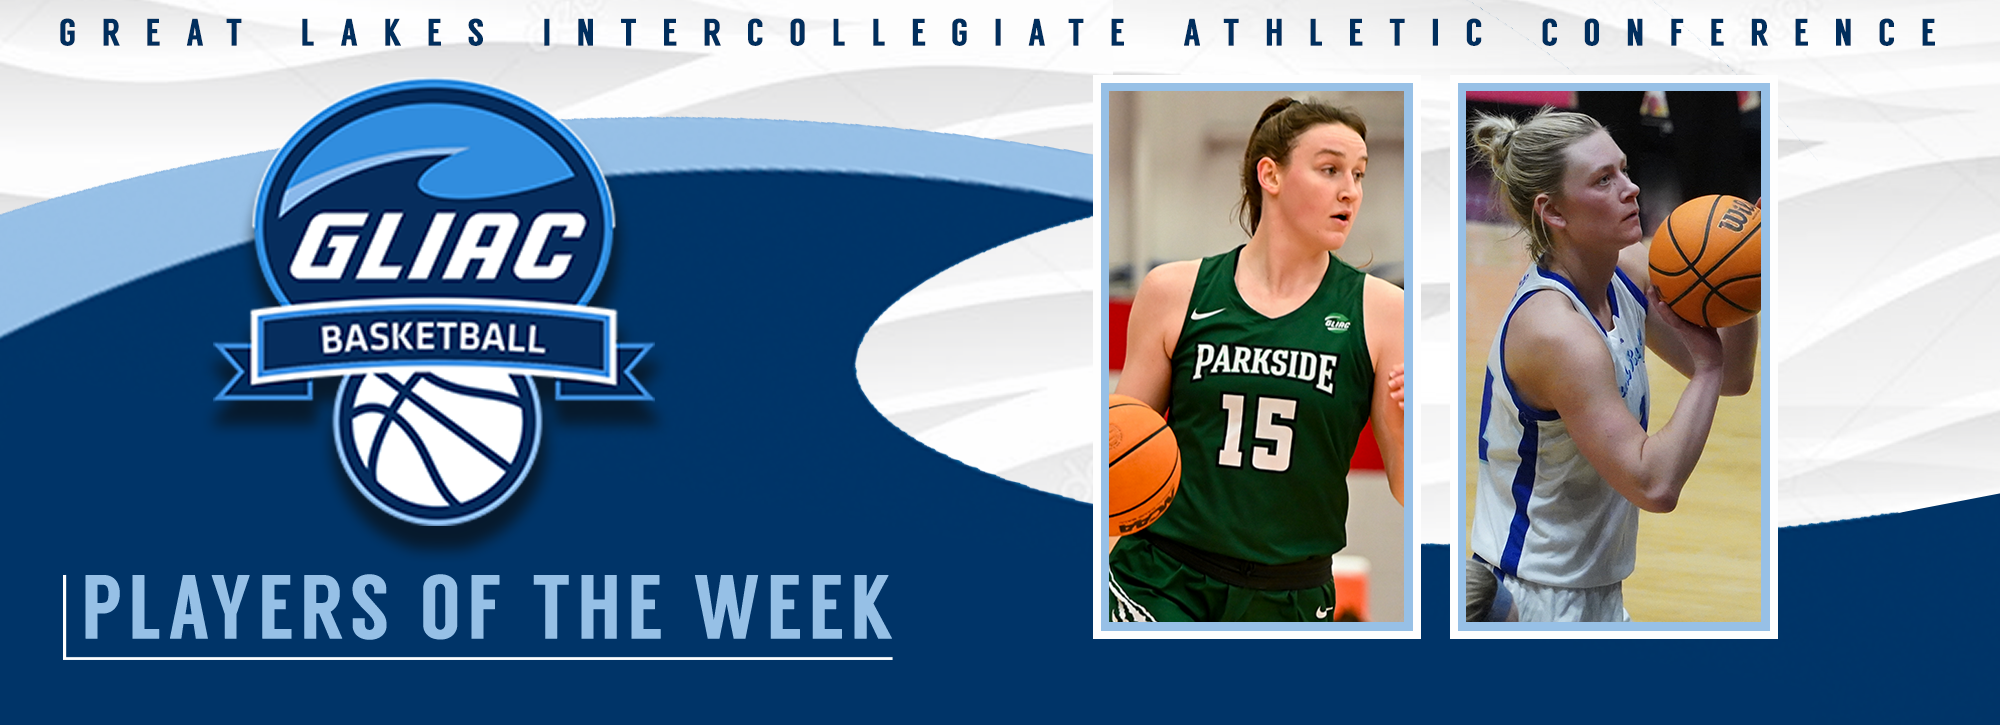 Parkside's Arni and GVSU's Bisballe selected for GLIAC women's basketball player of the week honors